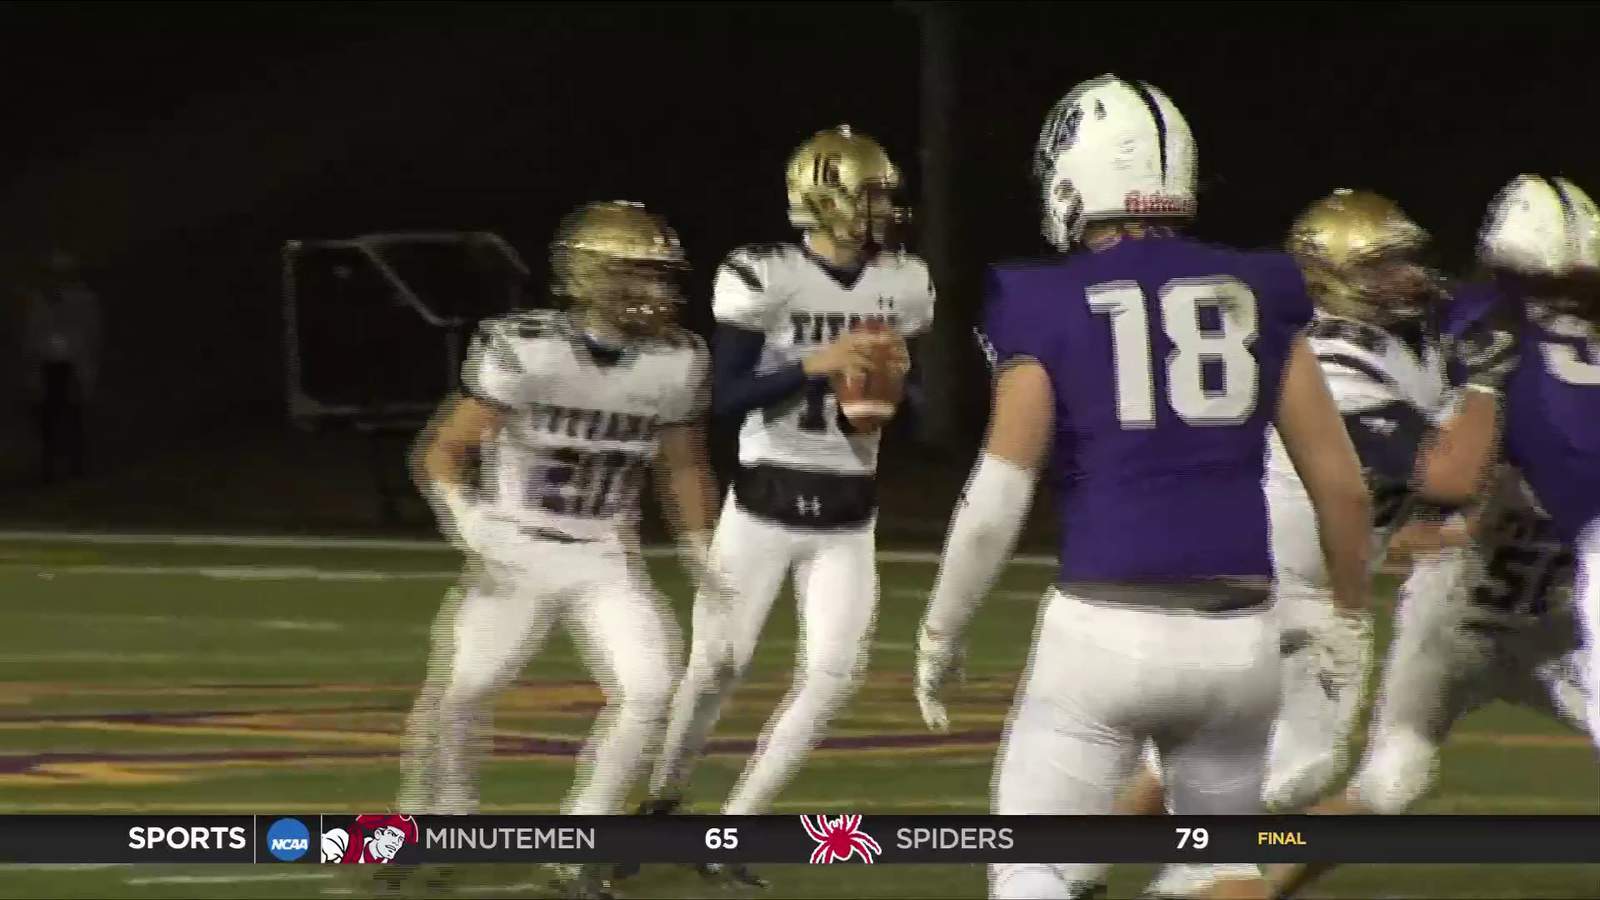 Patrick Henry opens 2021 season with a home win over Hidden Valley